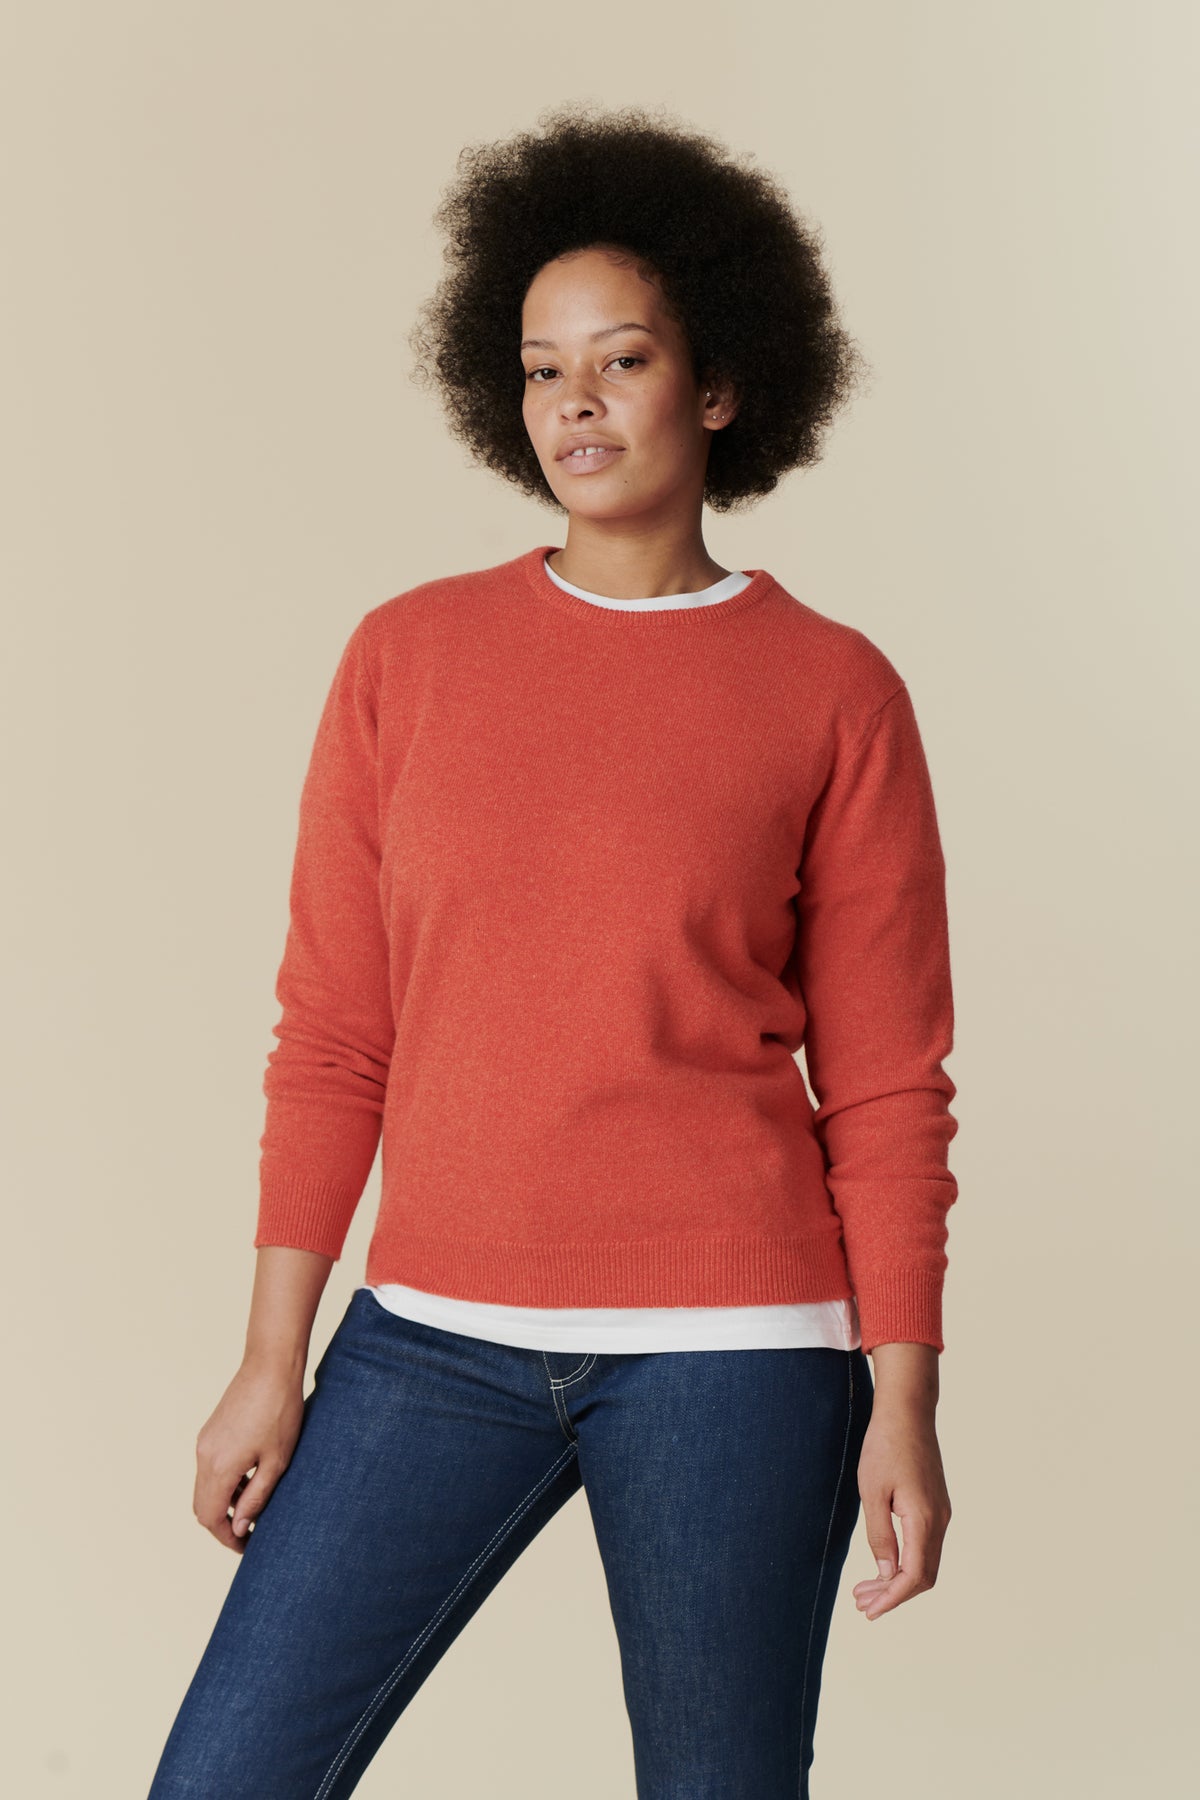 
            Knee up image of female wearing lambswool crew neck in flame red